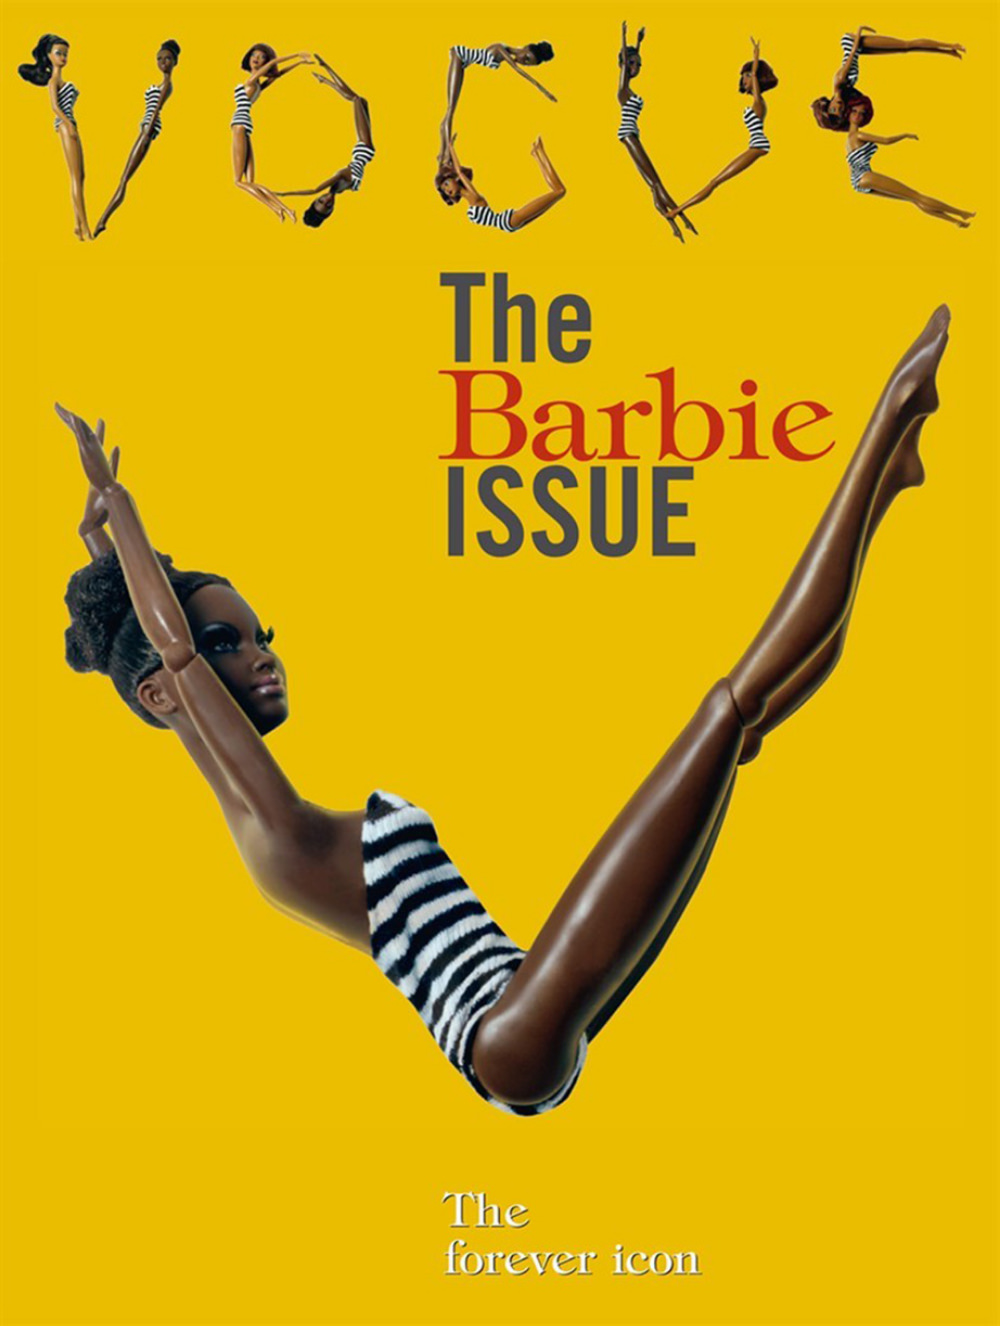 Barbie is photographed by Michael Baumgarten. Fashion editor: Giovanna Battaglia, for the cover of Barbie, The Black Issue, Vogue Italia, July 2008.